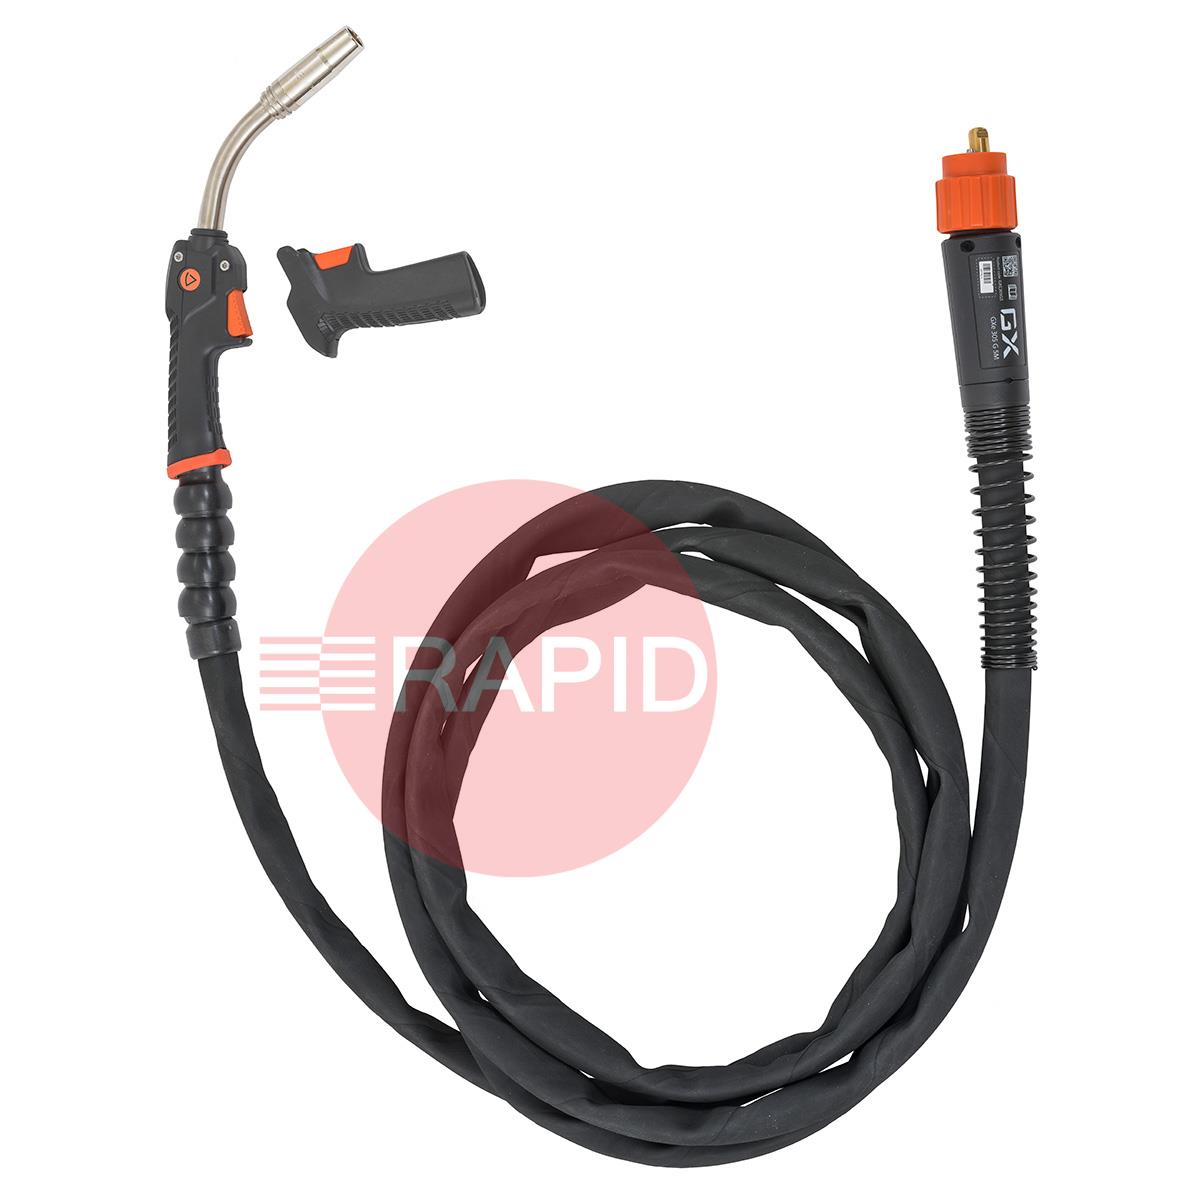 GXE305G35  Kemppi Flexlite GXe K5 305G Air Cooled 300A MIG Torch, w/ Euro Connection - 3.5m